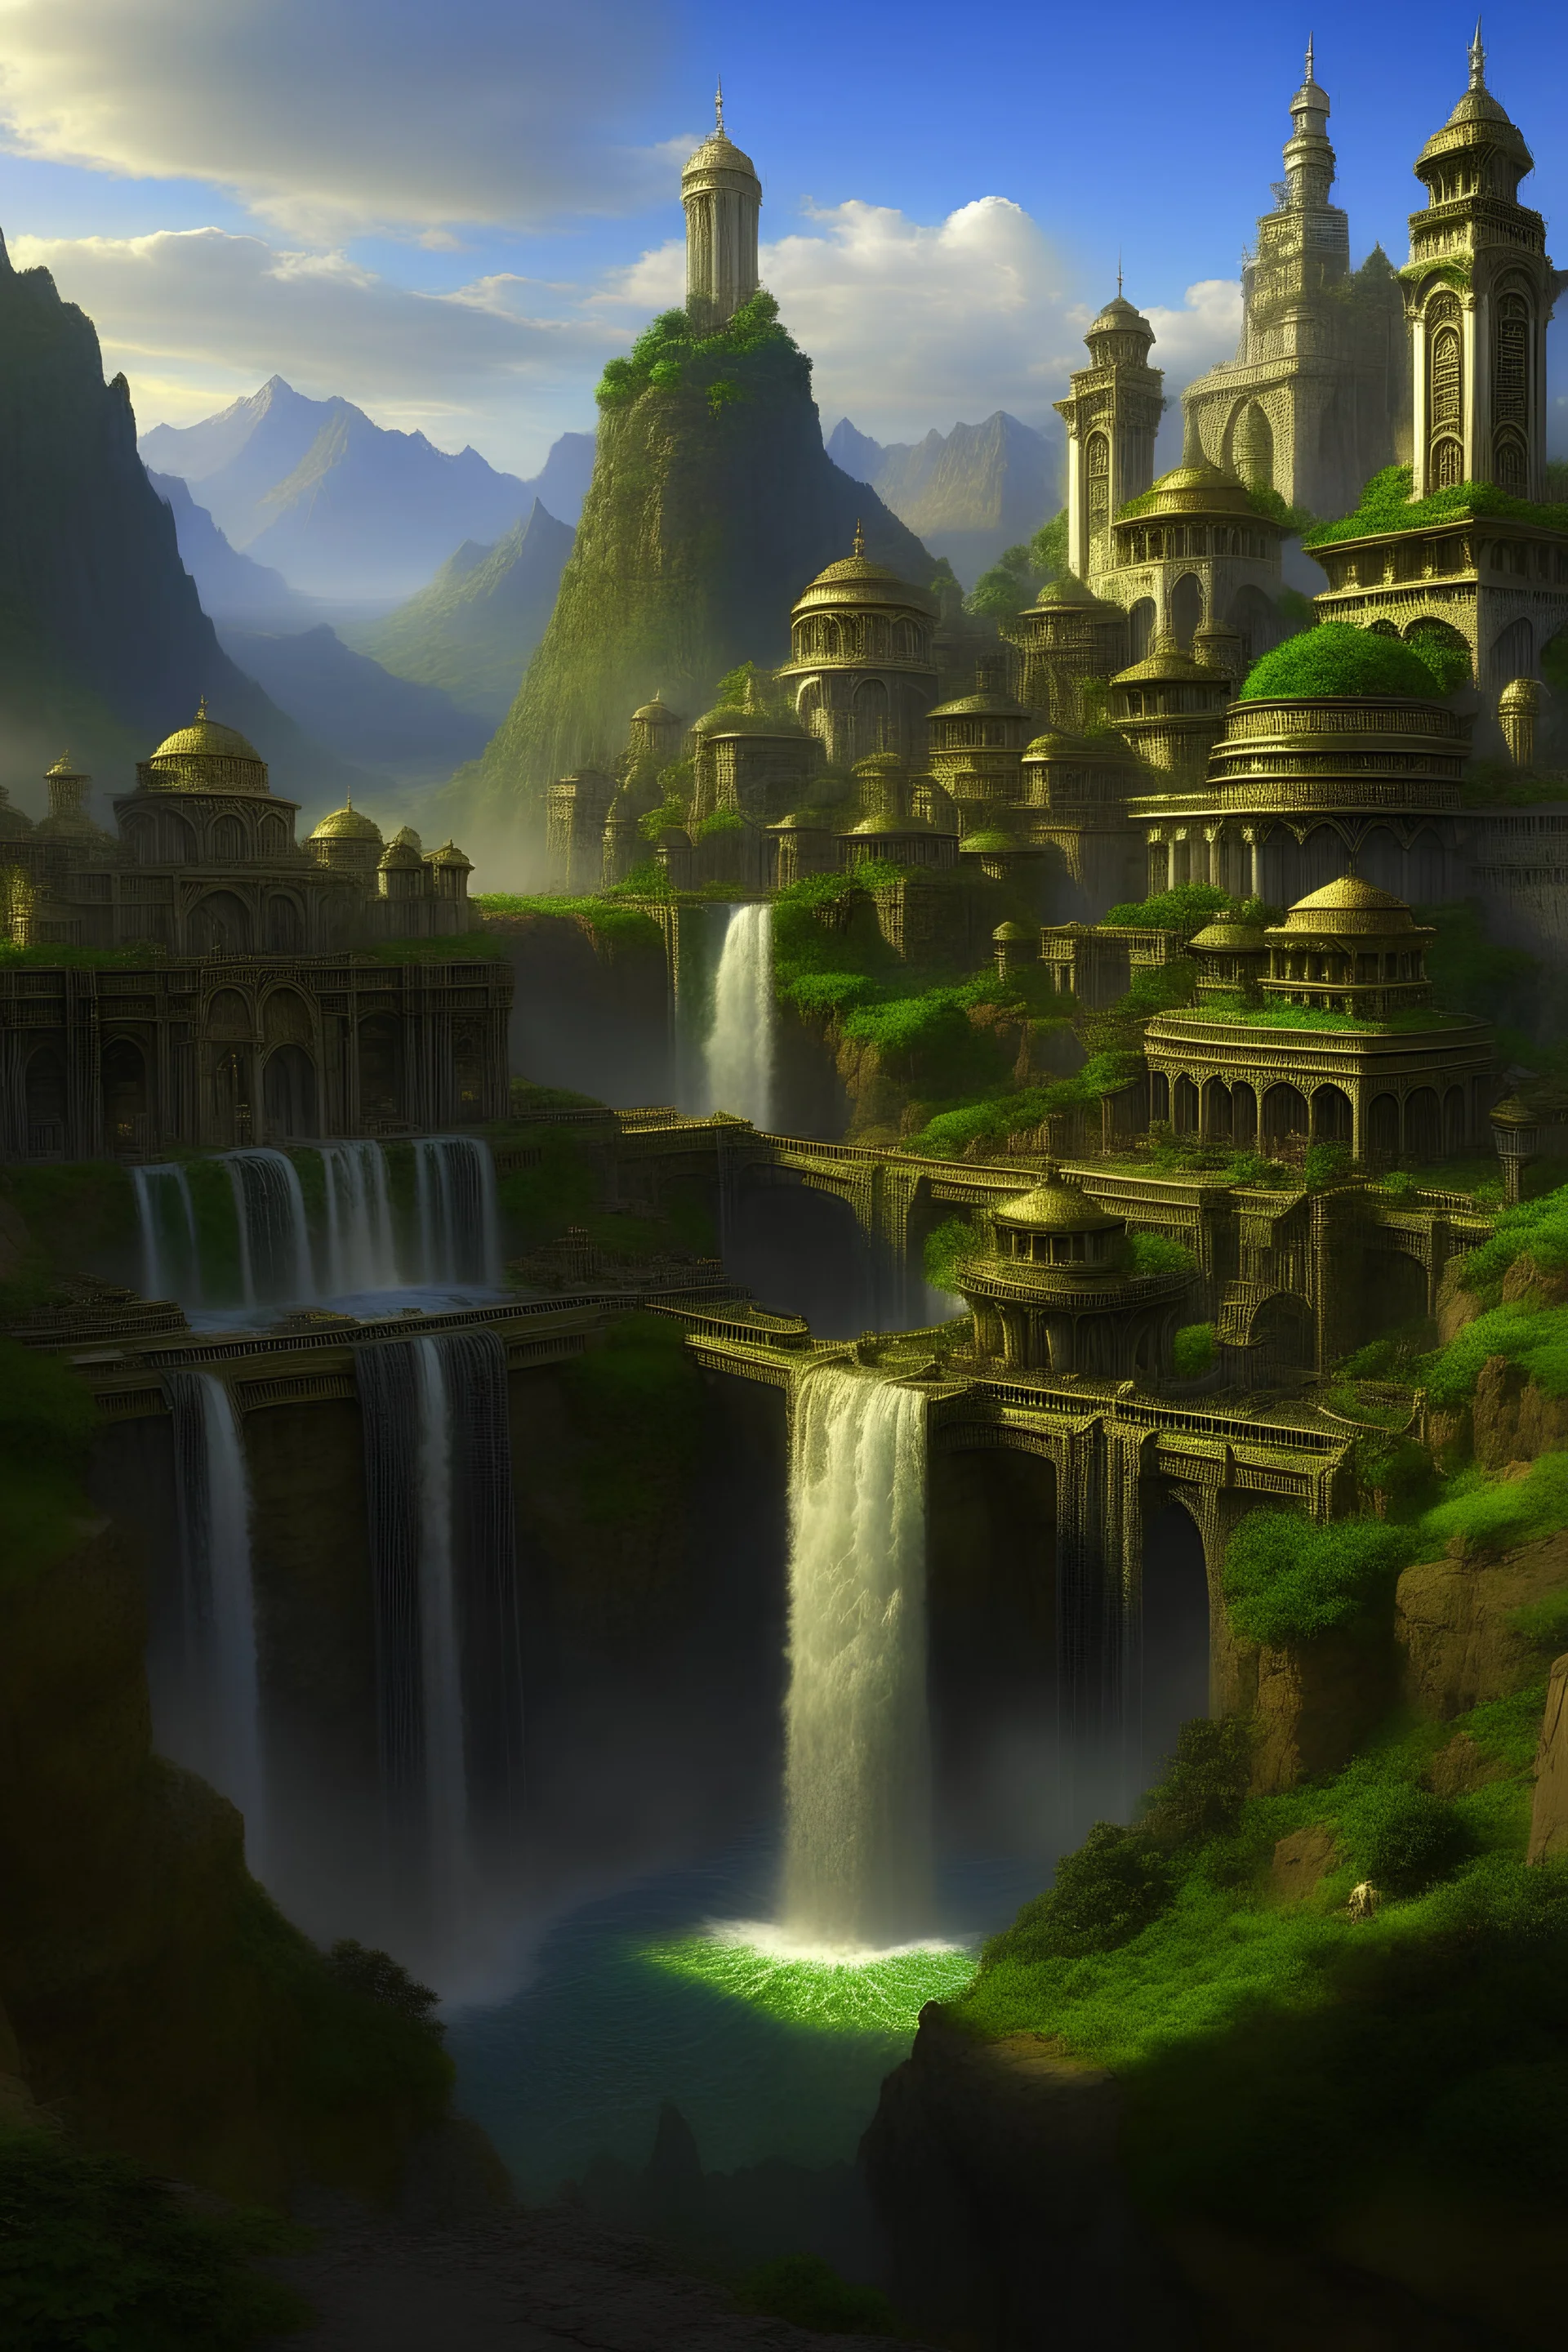 The Cascades are the name of a huge city built into the hills of the Eternal Spires, the largest mountain range in the world. It is controlled by 3 large factions. There is a massive waterfall cascading through the entire city to a large pool in the middle of the town square near the Moon Temple